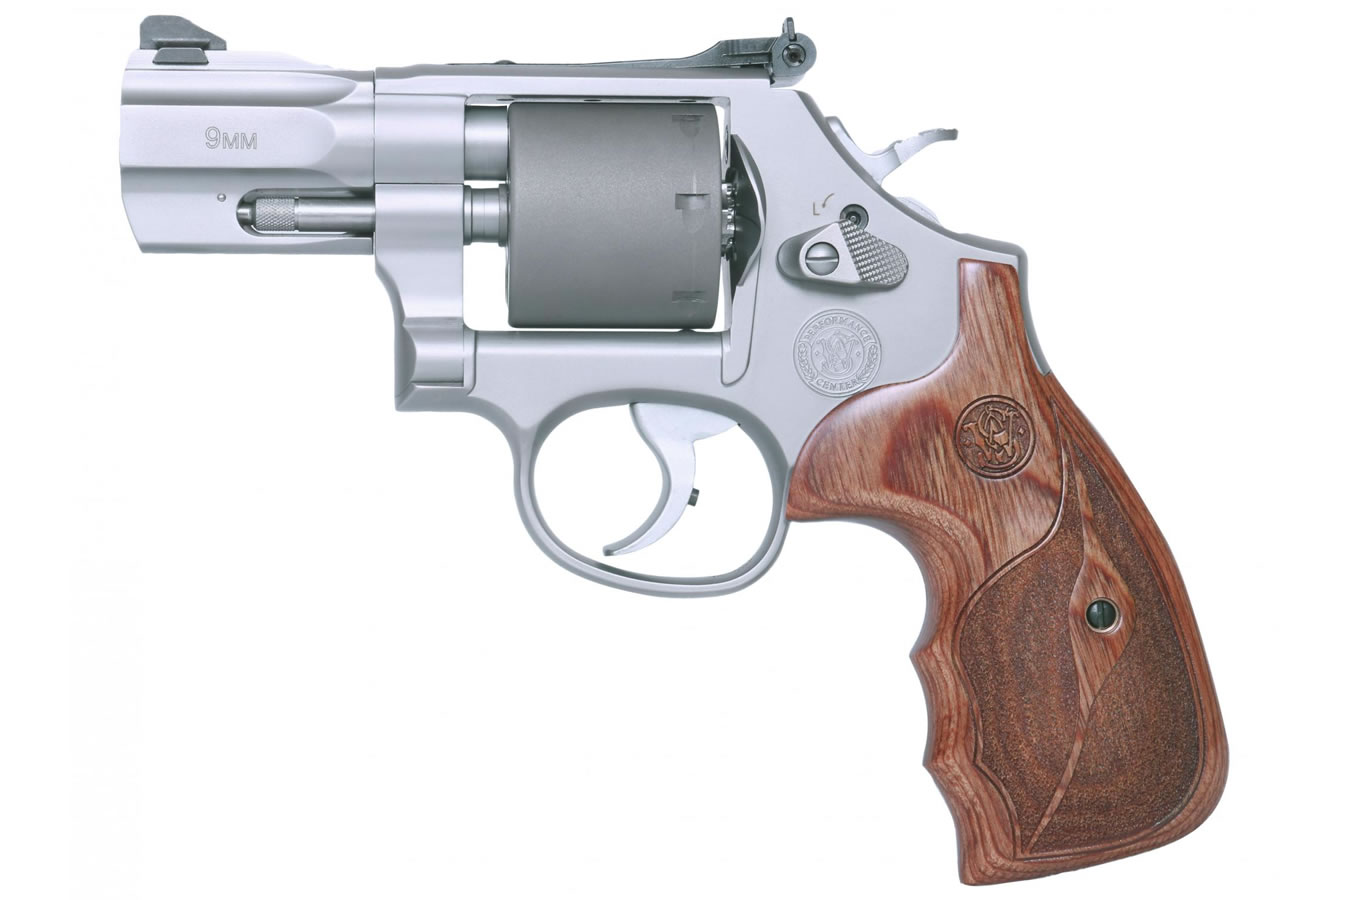 SMITH AND WESSON 986 9MM PERFORMANCE CENTER REVOLVER